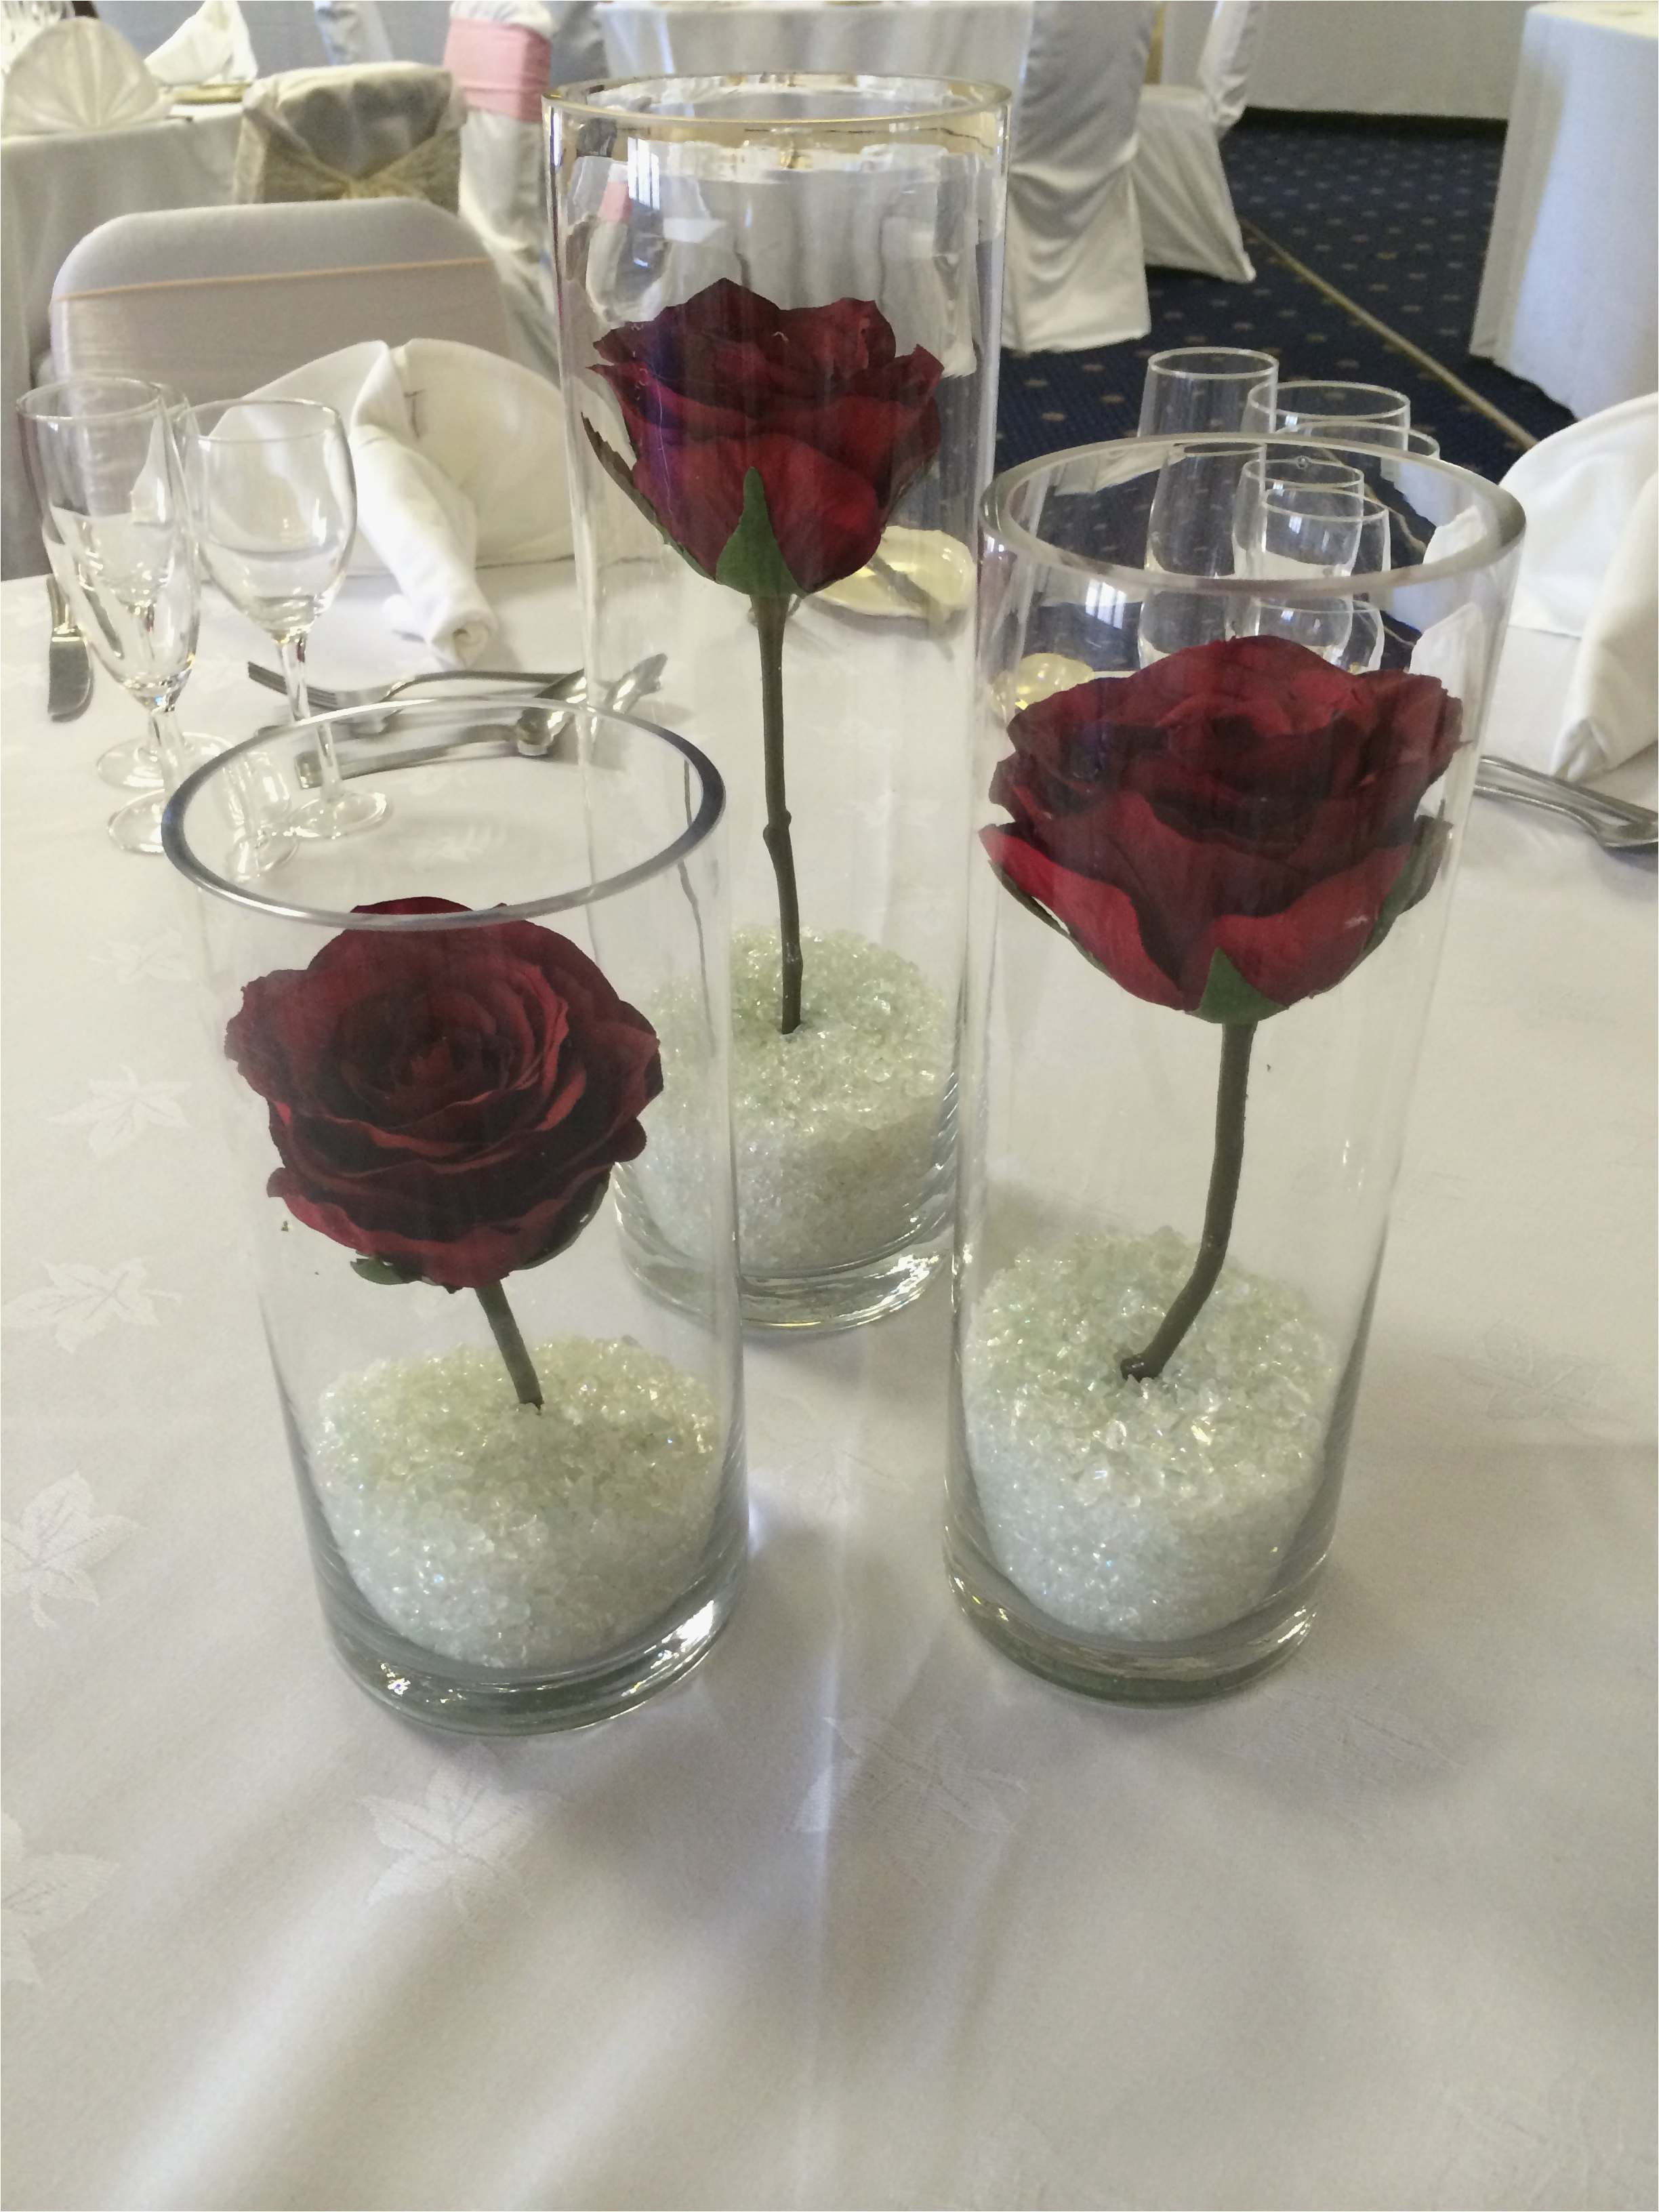 30 Awesome Small Glass Vases for Centerpieces 2024 free download small glass vases for centerpieces of wedding flower centerpieces style 30 awesome vintage glass vases for within wedding flower centerpieces awesome charming table vase decorations 20 tall 